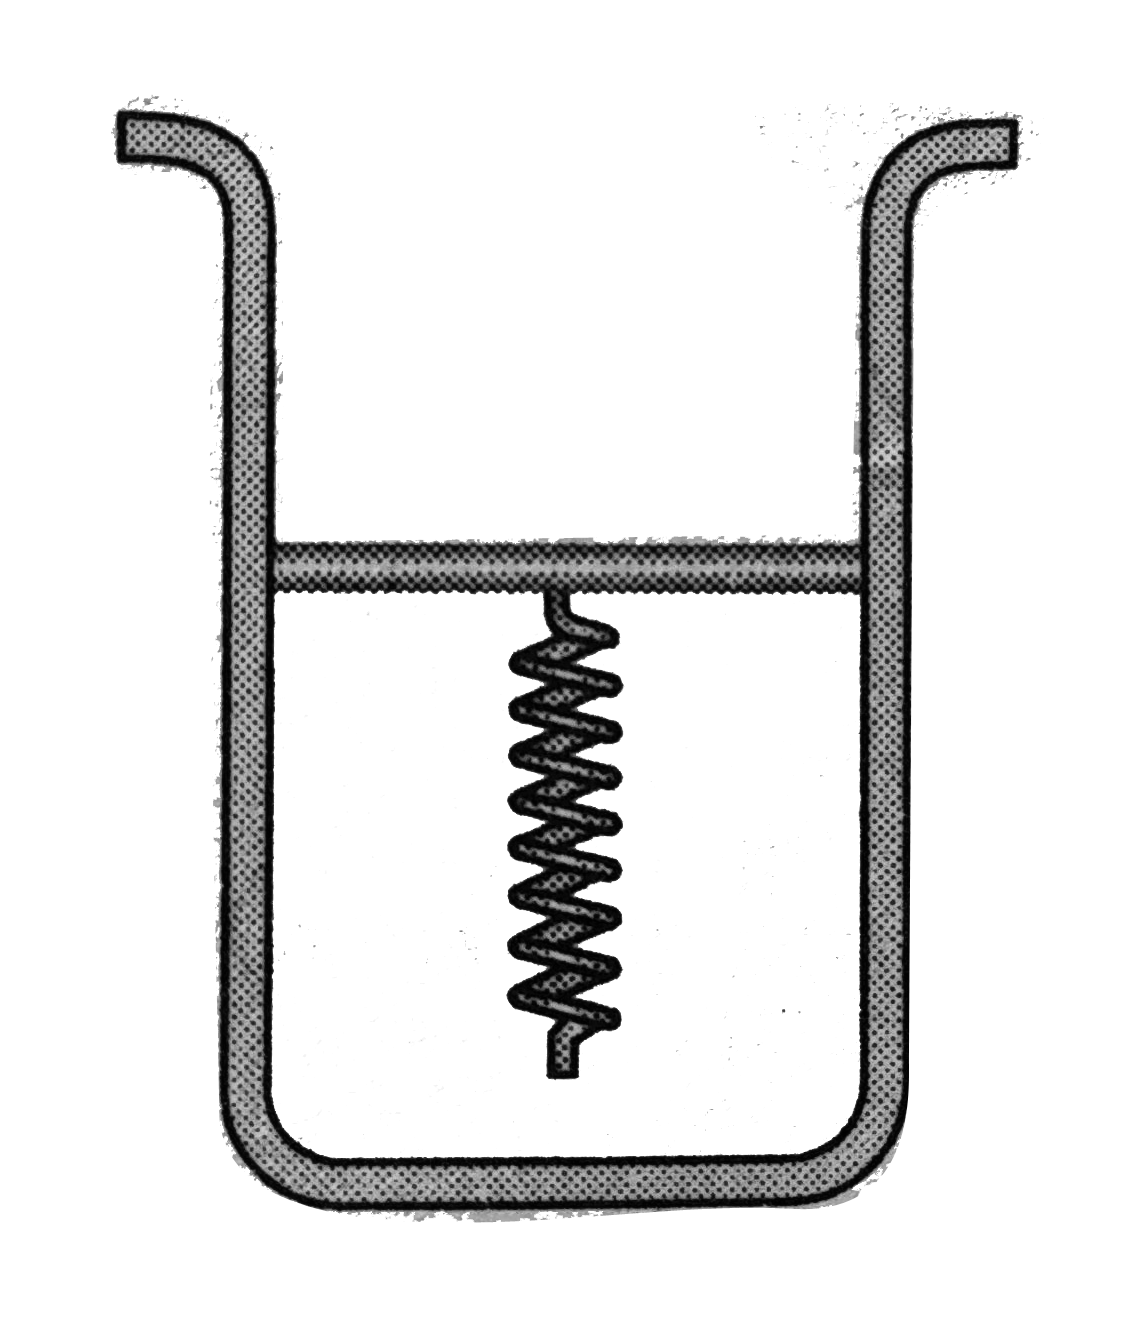 A cylinder is fitted with a piston, beneath which is a spring, as in the figure. The cylinder is open at the top. Friction is absent. The spring is 3600 N//m. The piston has a negligible mass and a radius of 0.025m (a) when air beneath the piston is completely pumped out, how much does the atmospheric pressure cause the spring to compress? (b) How much work does the atmospheric pressure do in compressing the spring?